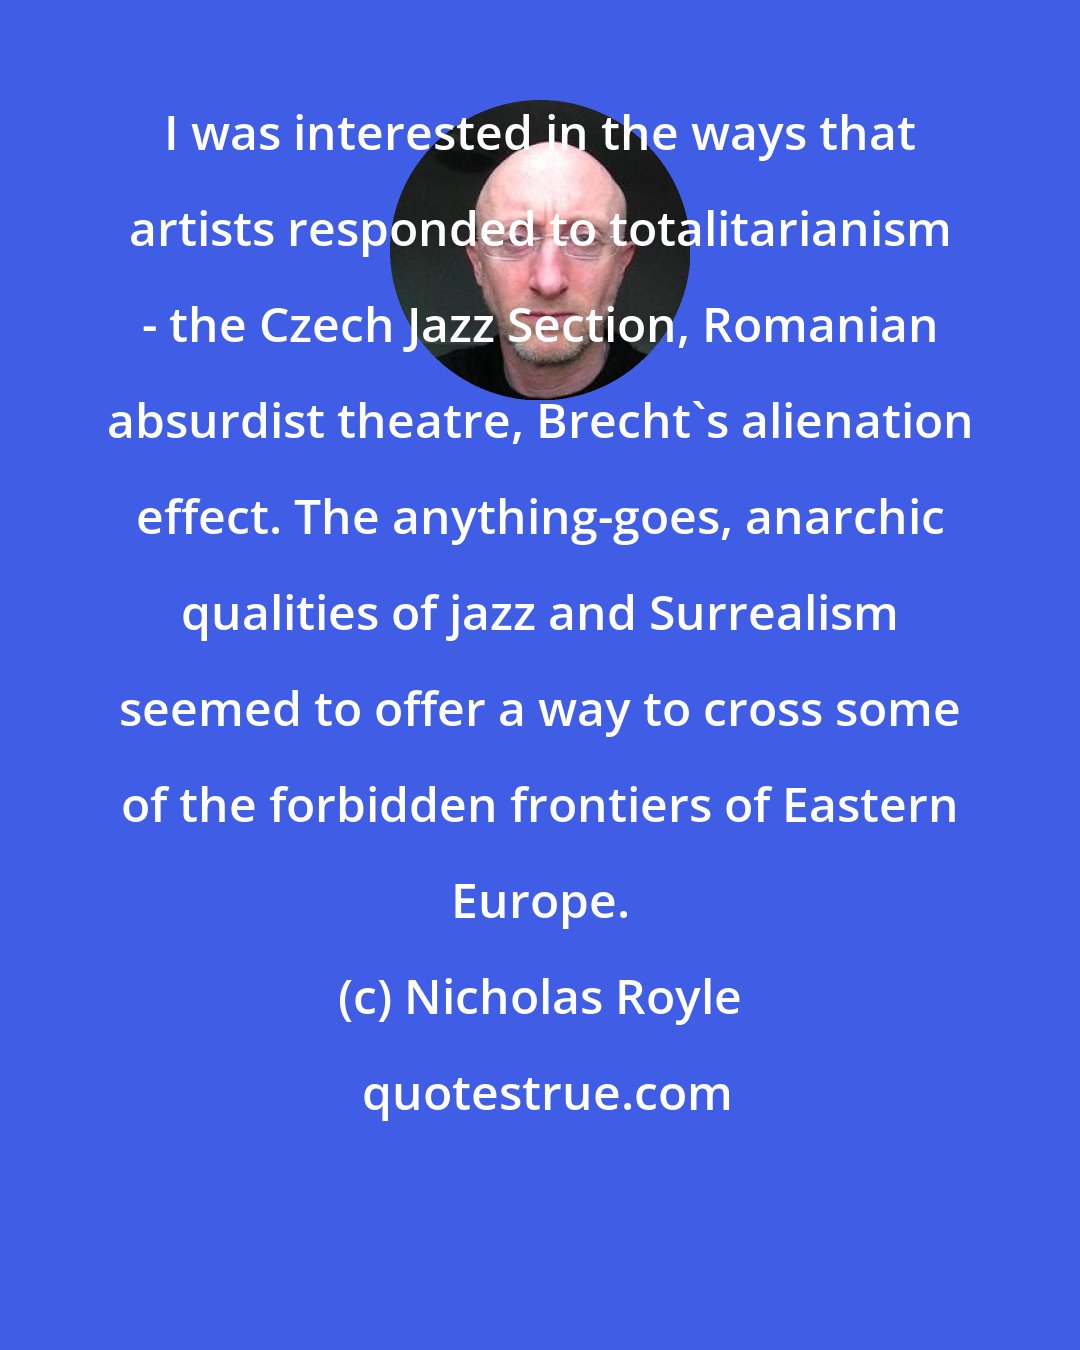 Nicholas Royle: I was interested in the ways that artists responded to totalitarianism - the Czech Jazz Section, Romanian absurdist theatre, Brecht's alienation effect. The anything-goes, anarchic qualities of jazz and Surrealism seemed to offer a way to cross some of the forbidden frontiers of Eastern Europe.